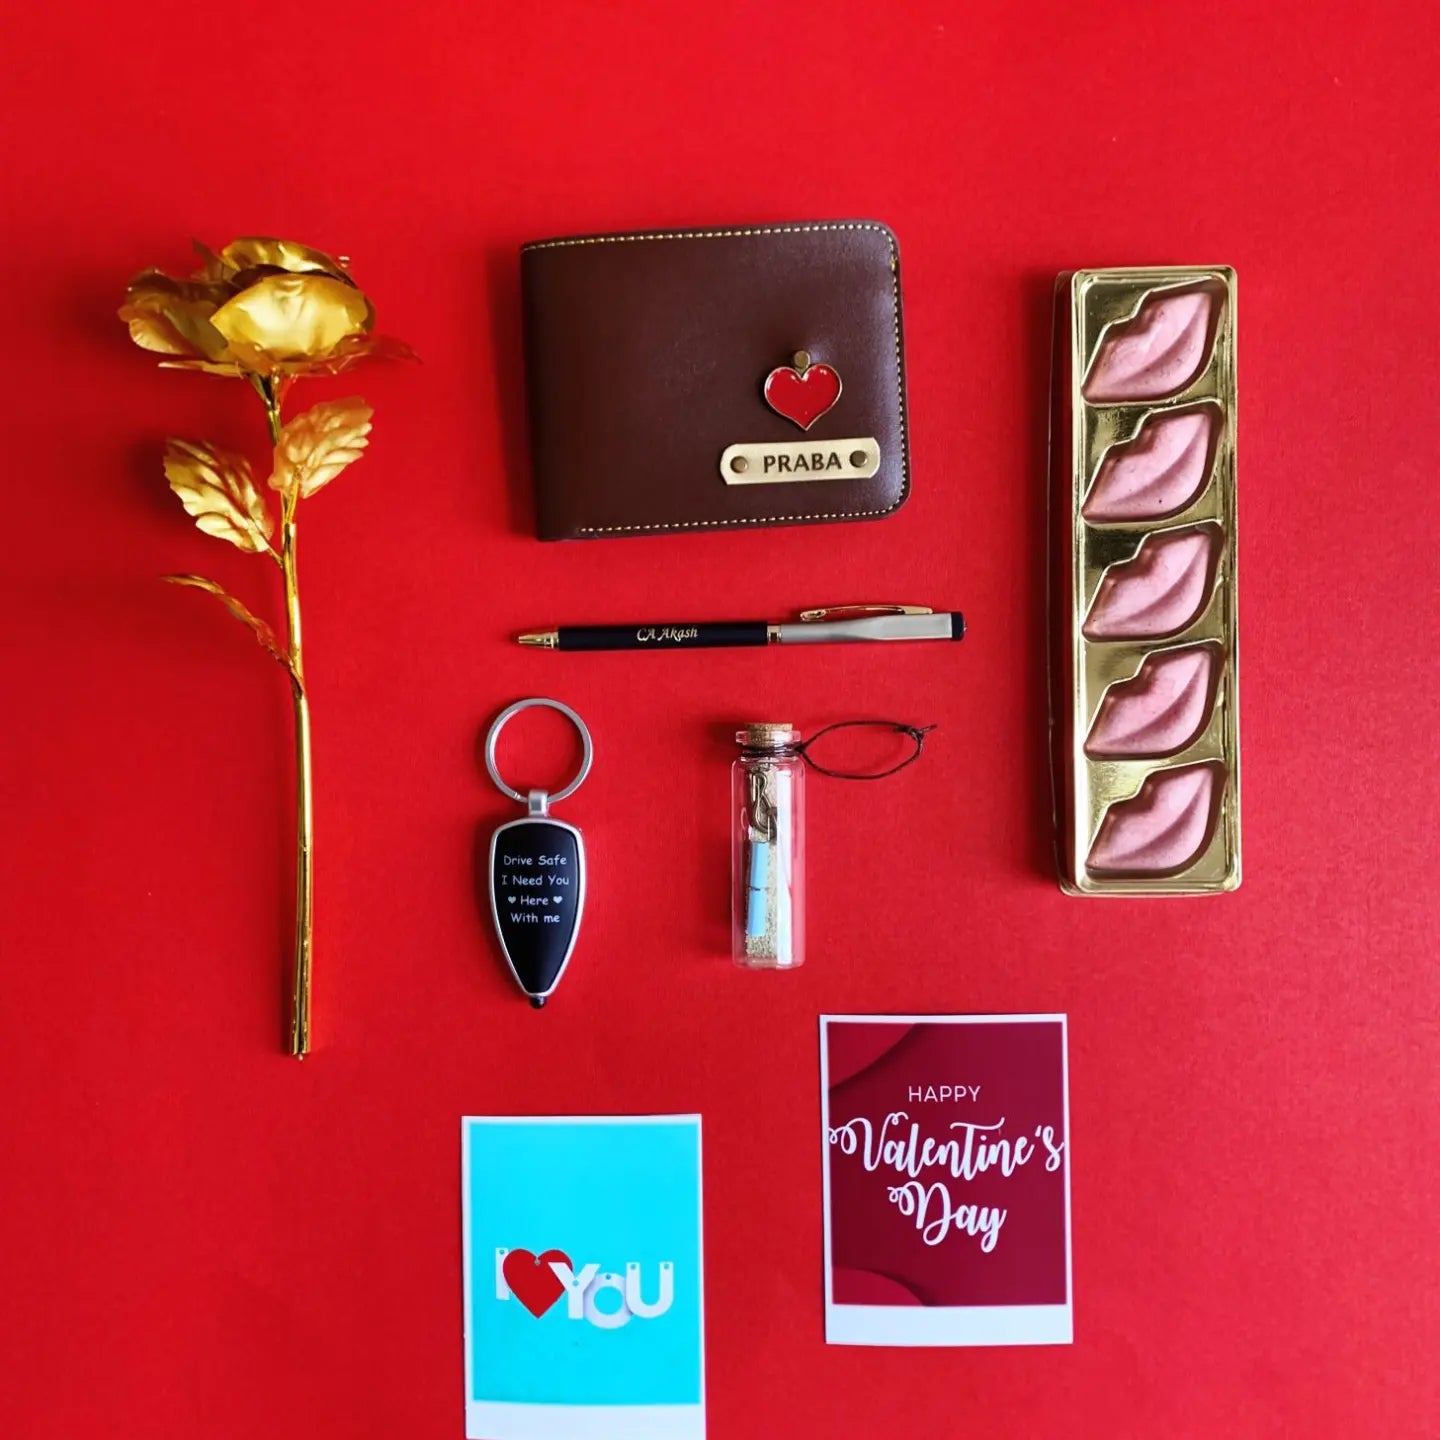 Midiron Love Combo Gift Hamper|Valentine's Day Gift|Chocolate Gifts  Box|Romantic Gift for Girlfriend/Wife|Unique Gift with Heart Shape  Chocolate Box | Red Rose | Greeting Card | Heart Cushion : Amazon.in:  Grocery & Gourmet